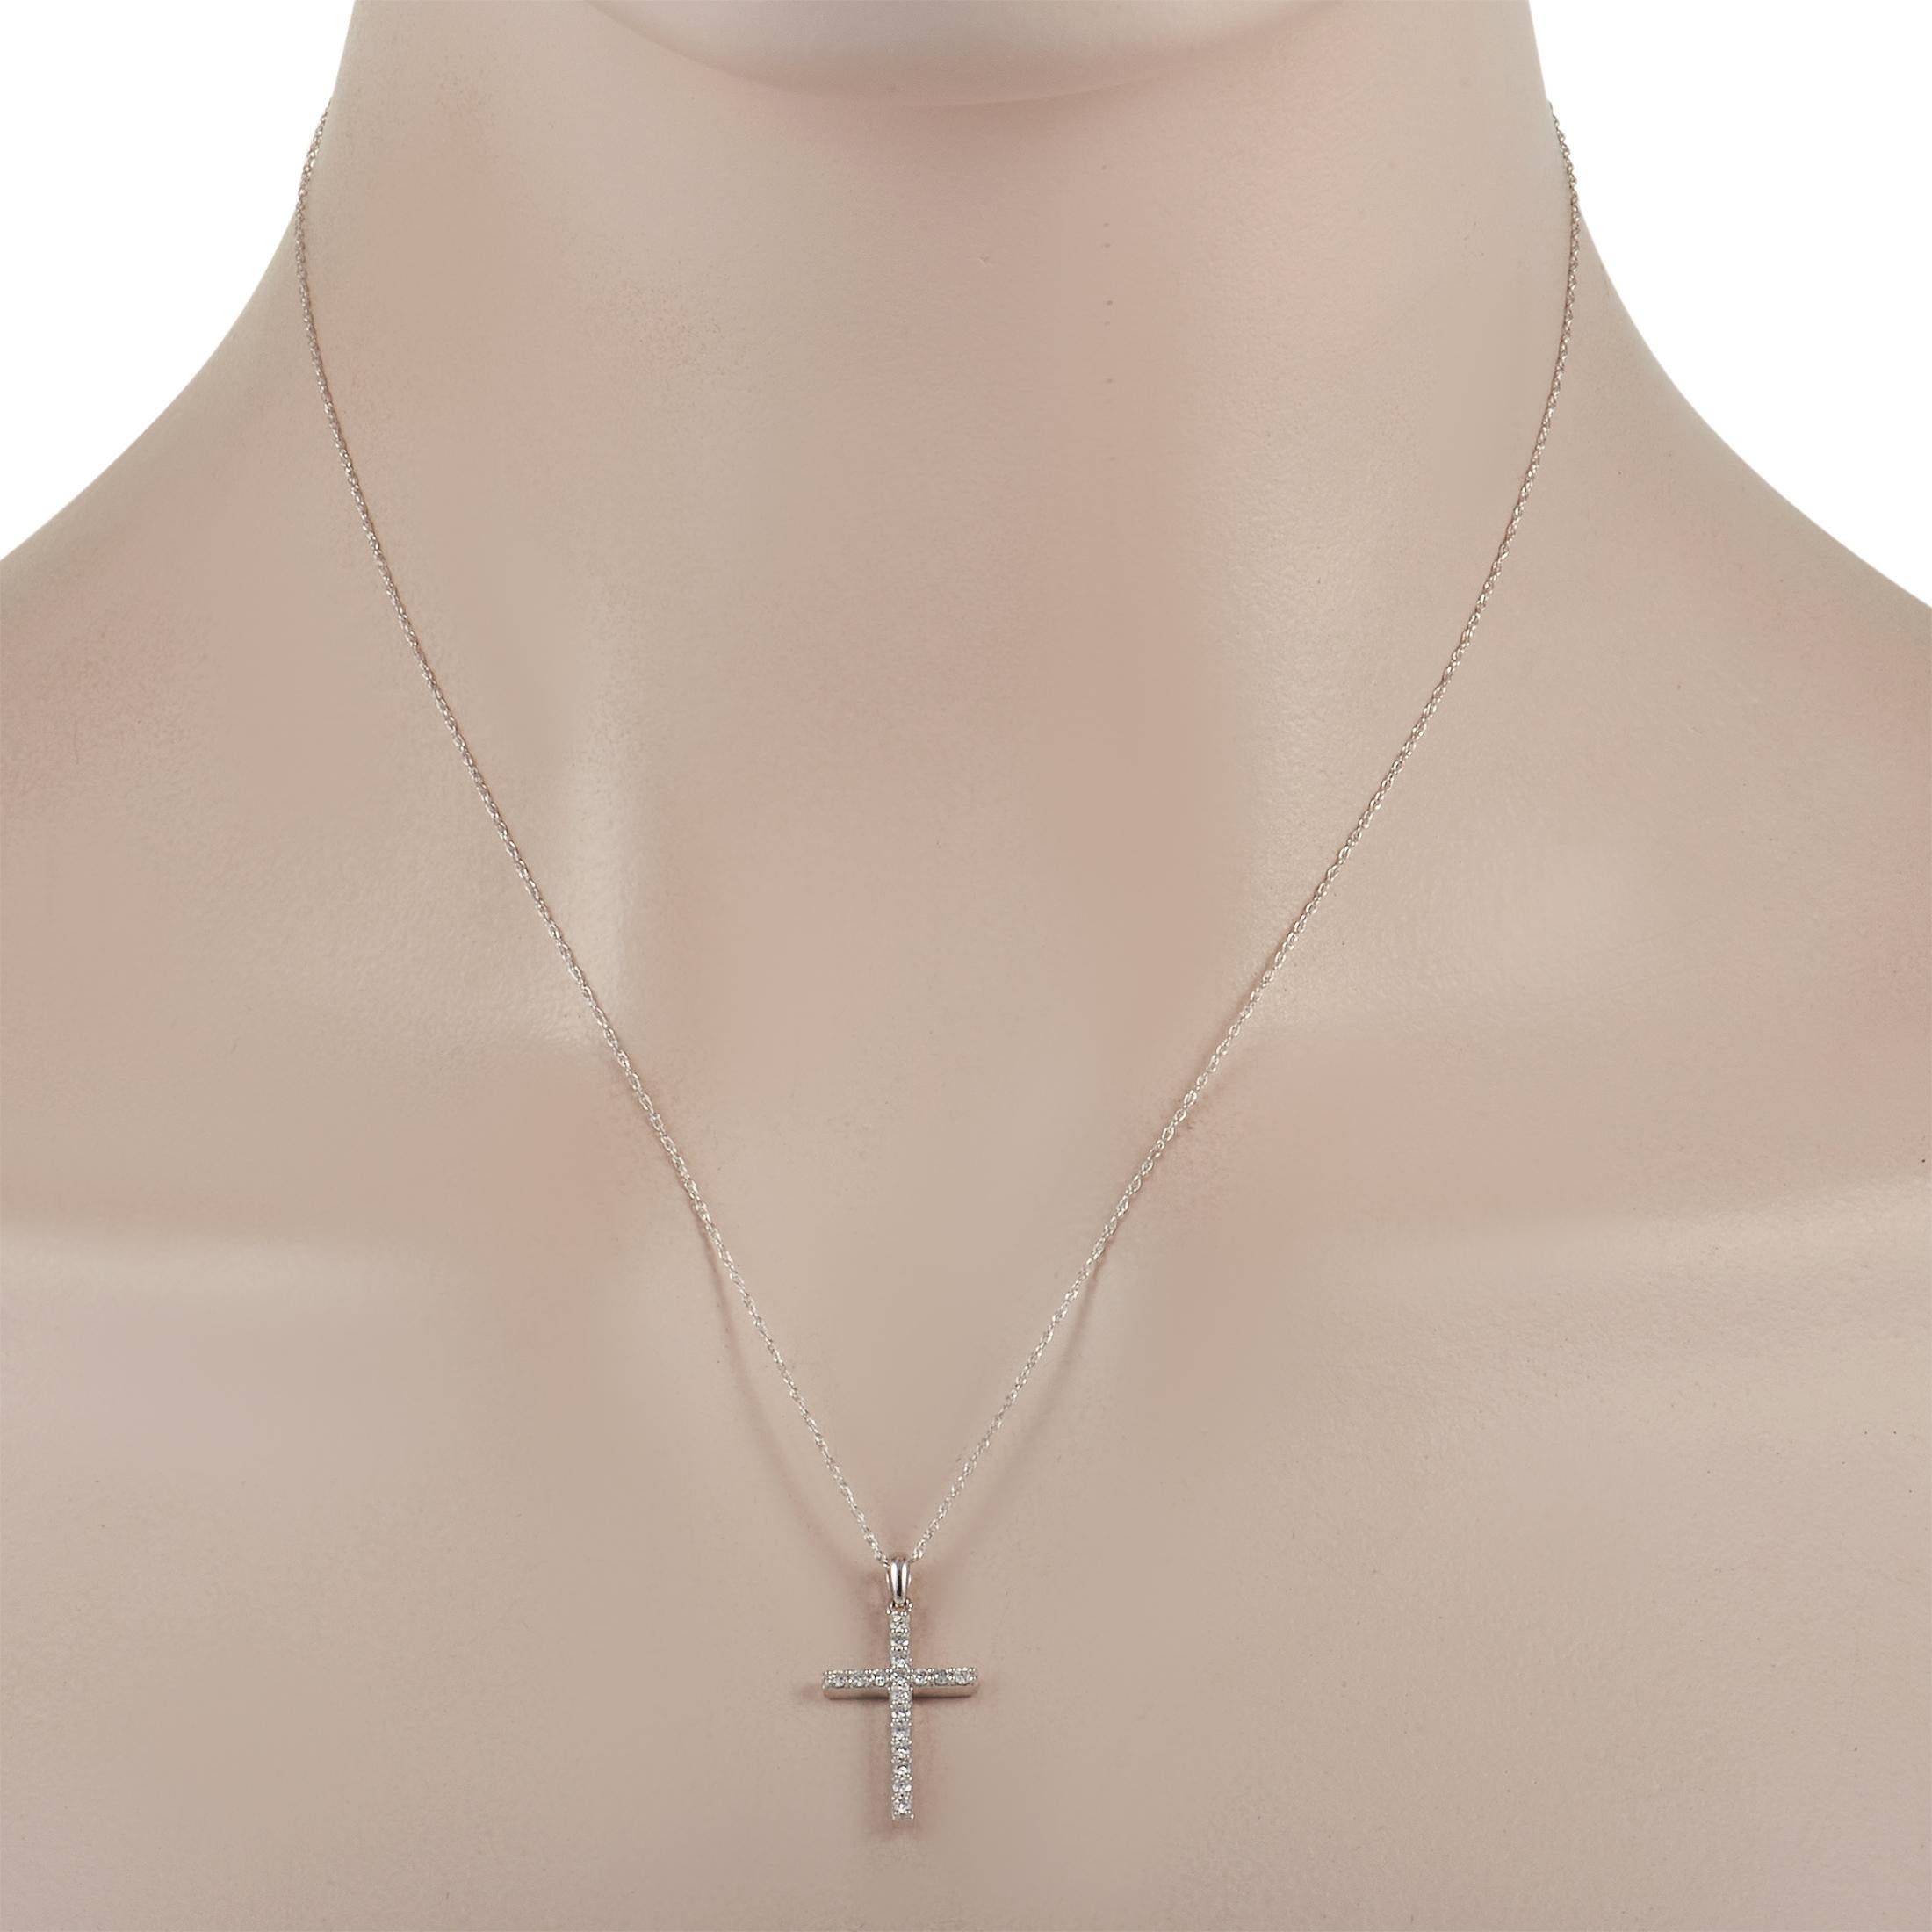 This necklace is an elegant symbol of faith that is ideal for everyday wear. Suspended from an 18” chain, you’ll find a sleek 14K White Gold cross shaped pendant that measures 1” long and 0.5” wide. Diamonds with a total weight of 0.23 carats ensure